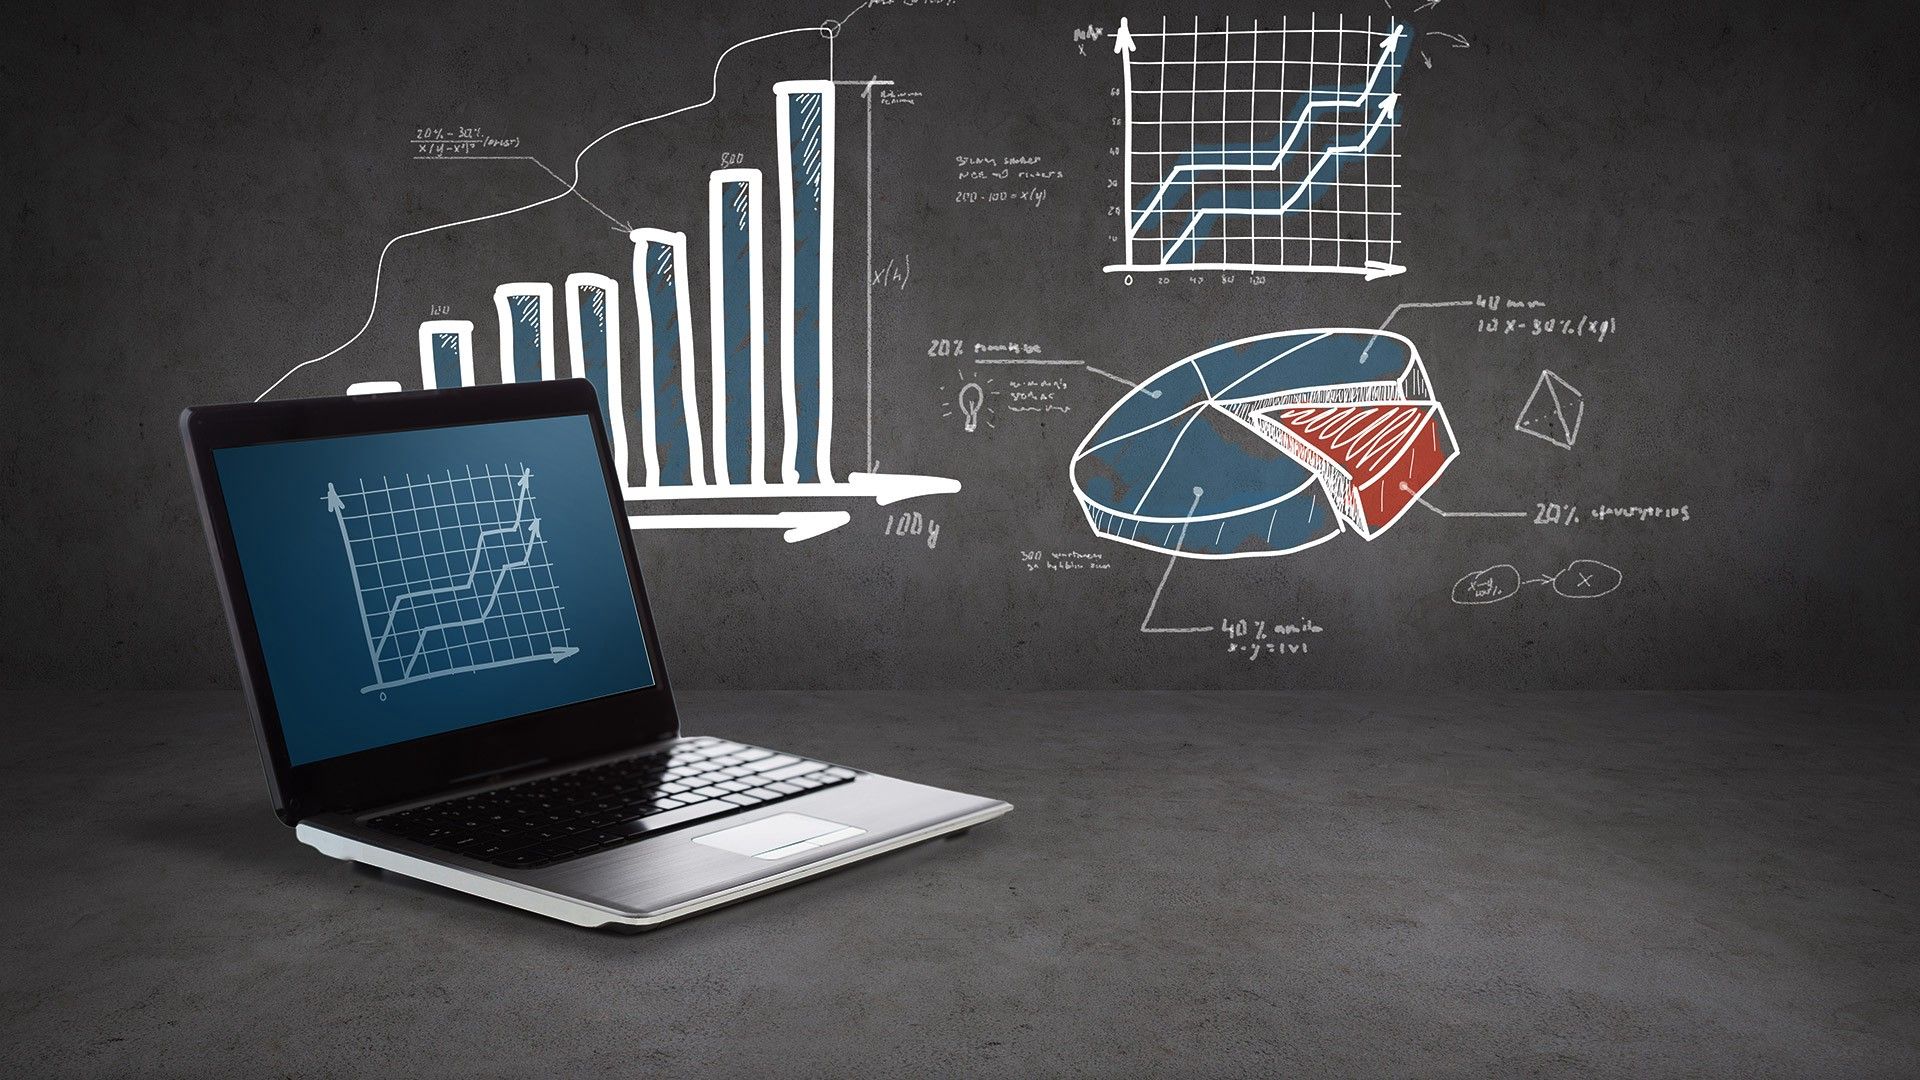 Business Intelligence Images Wallpapers